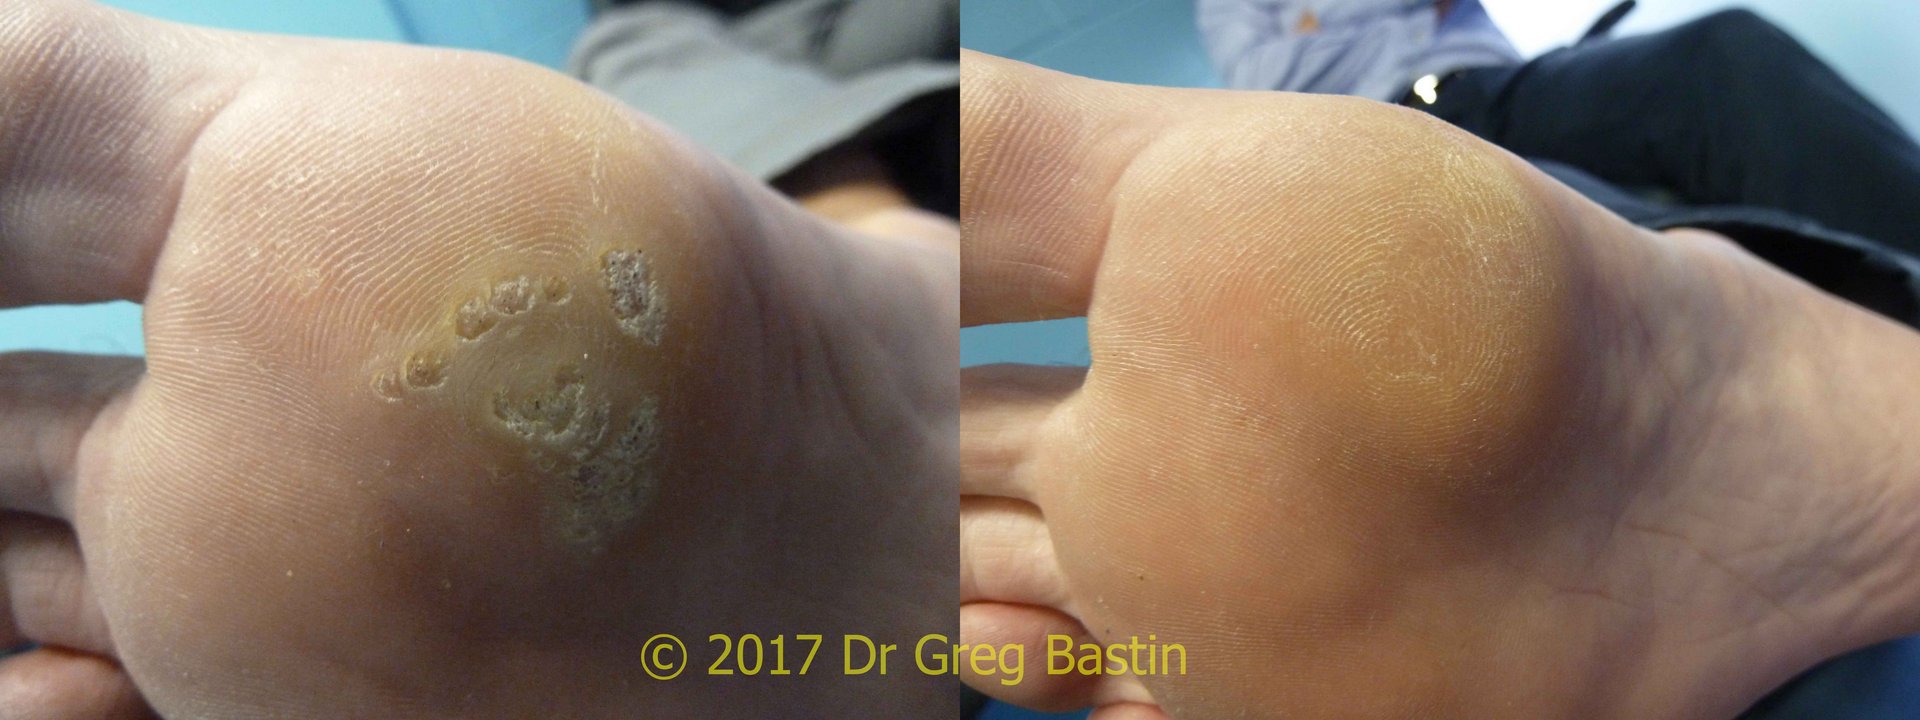 wart removal specialist treatment melbourne